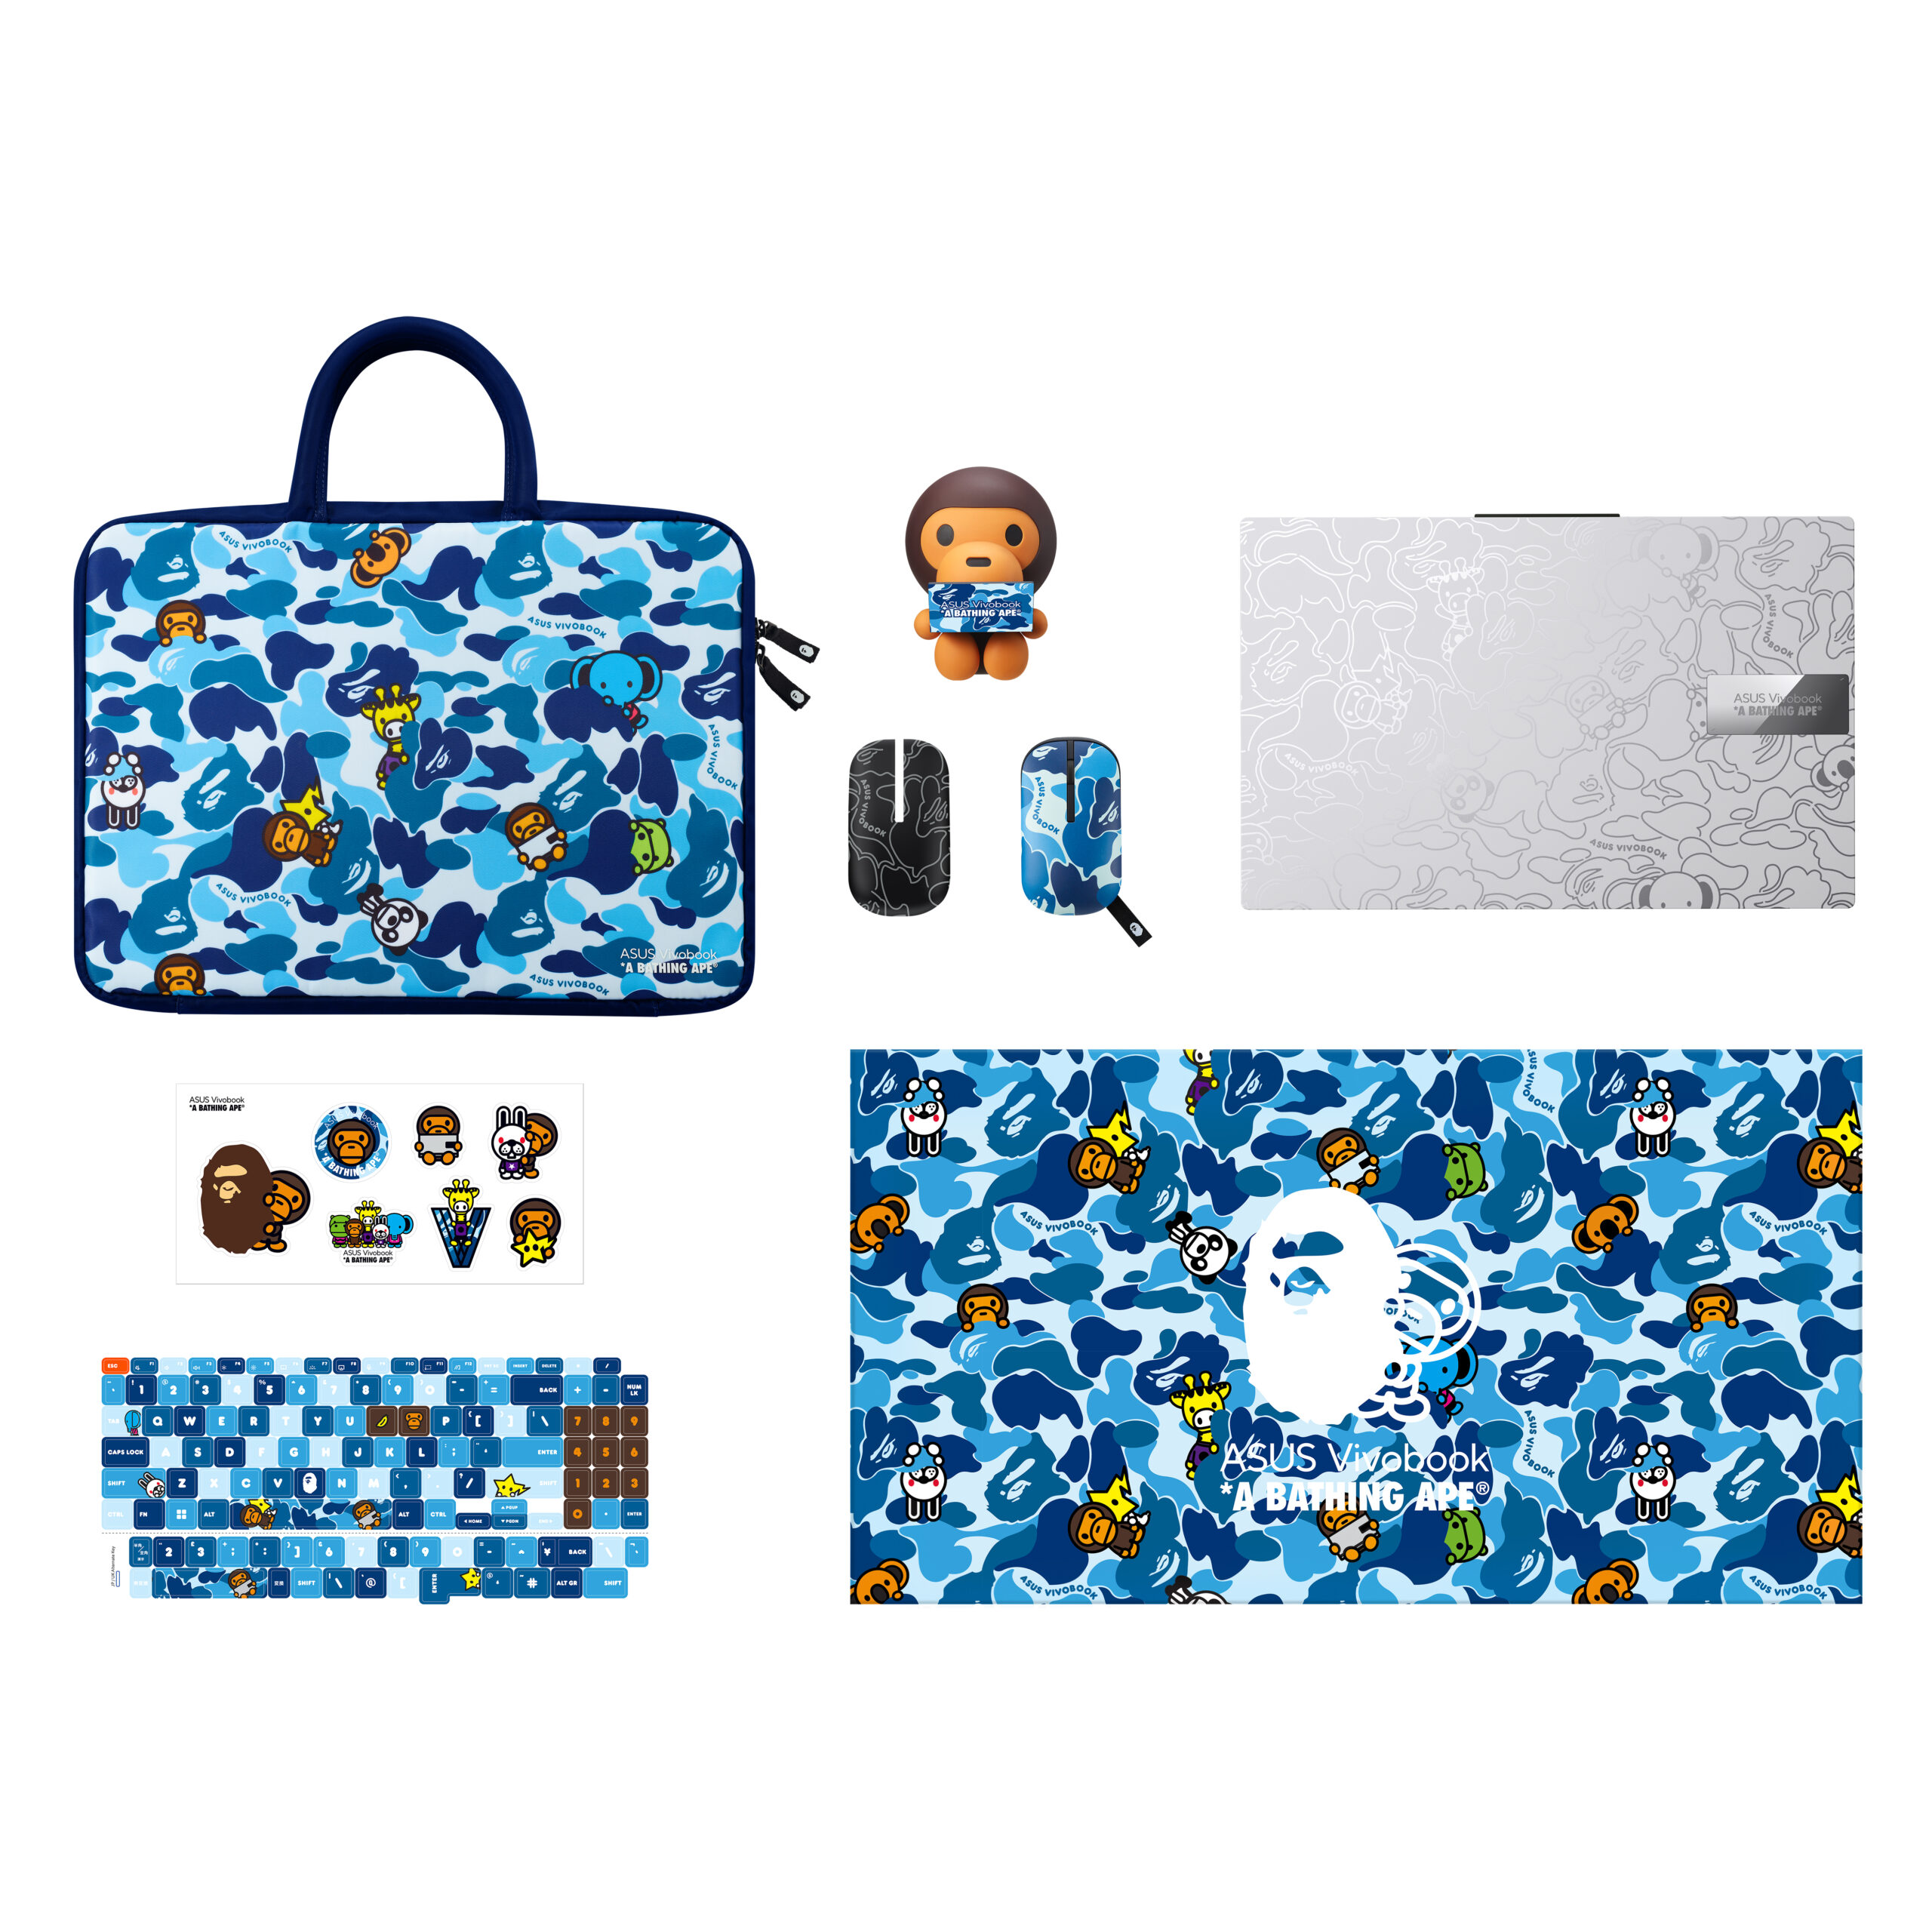 Vivobook S 15 OLED BAPE Edition Blue Camo Bundle with Silver Laptop overlooking view of silver laptops and blue camo bundle scaled